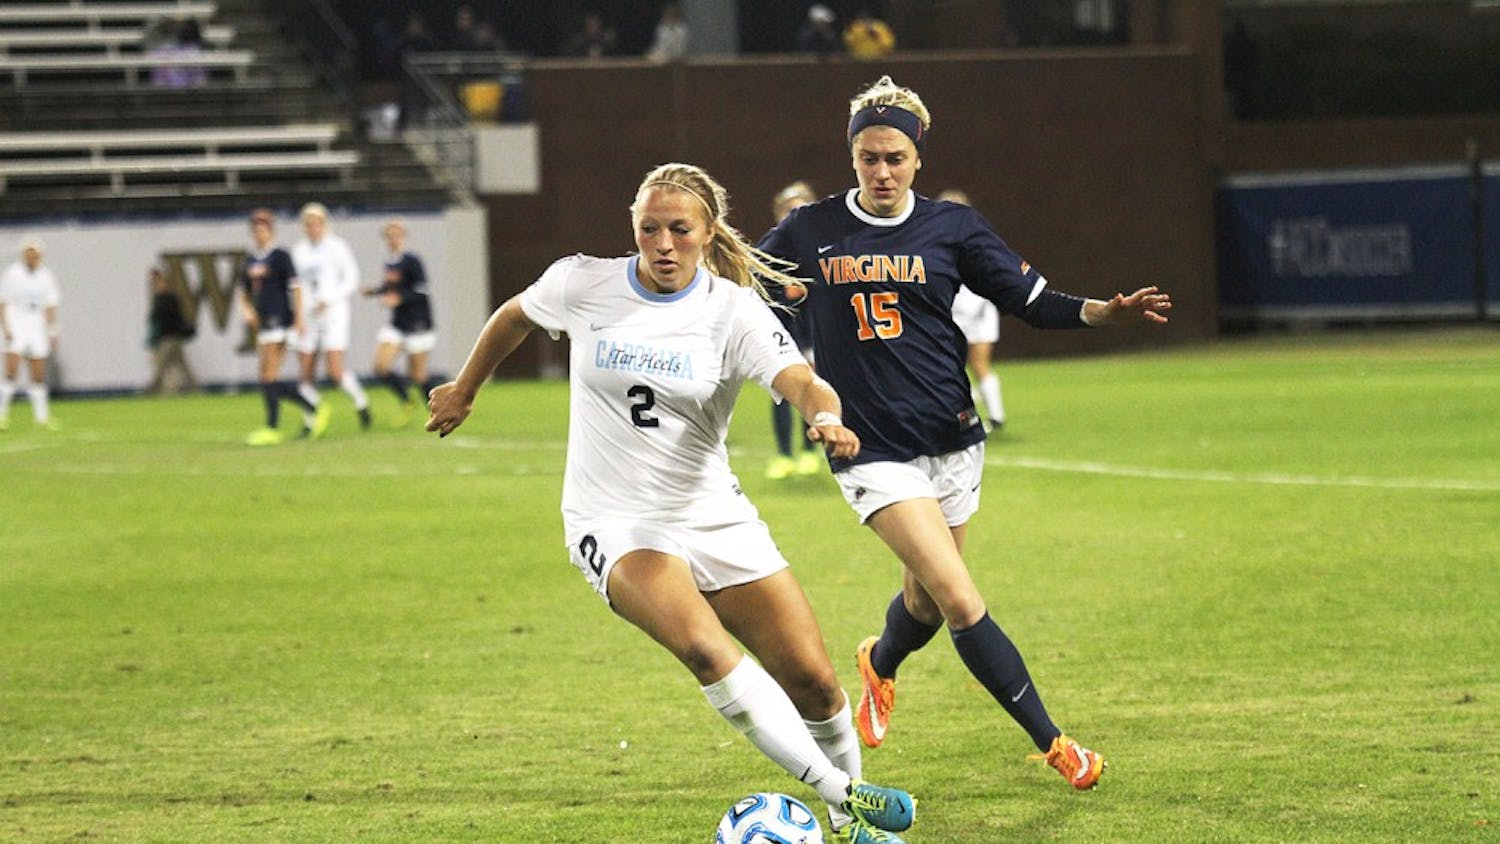 The UNC women's soccer team lost 2-0 to Virginia at UNCG for the ACC tournament.